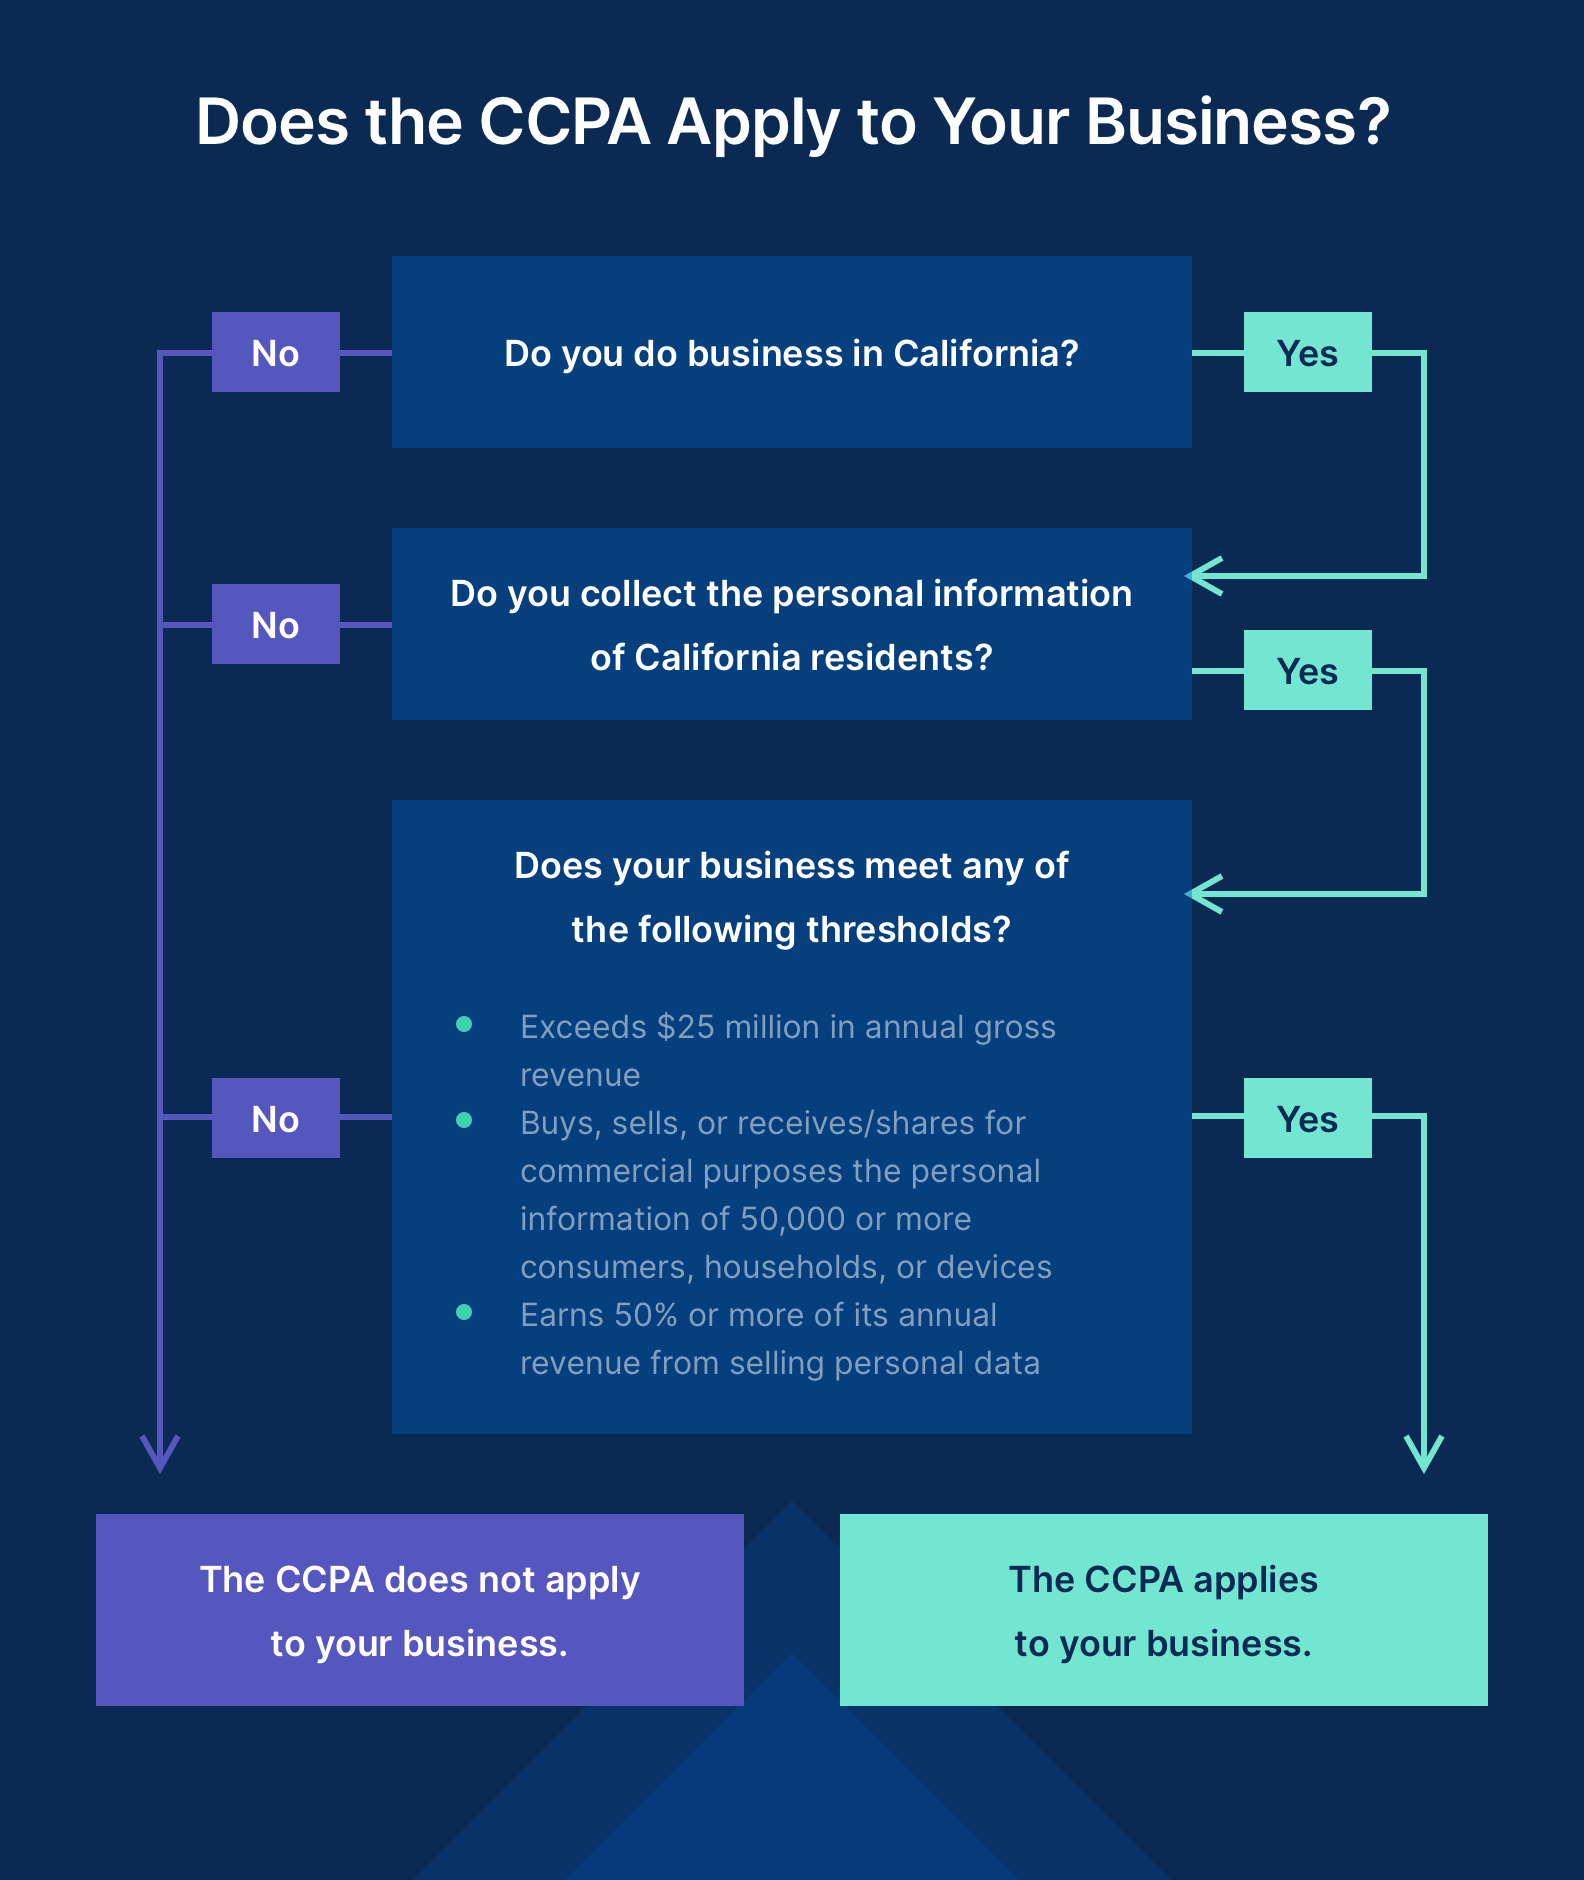 Flowchart to determine whether CCPA applies to your business